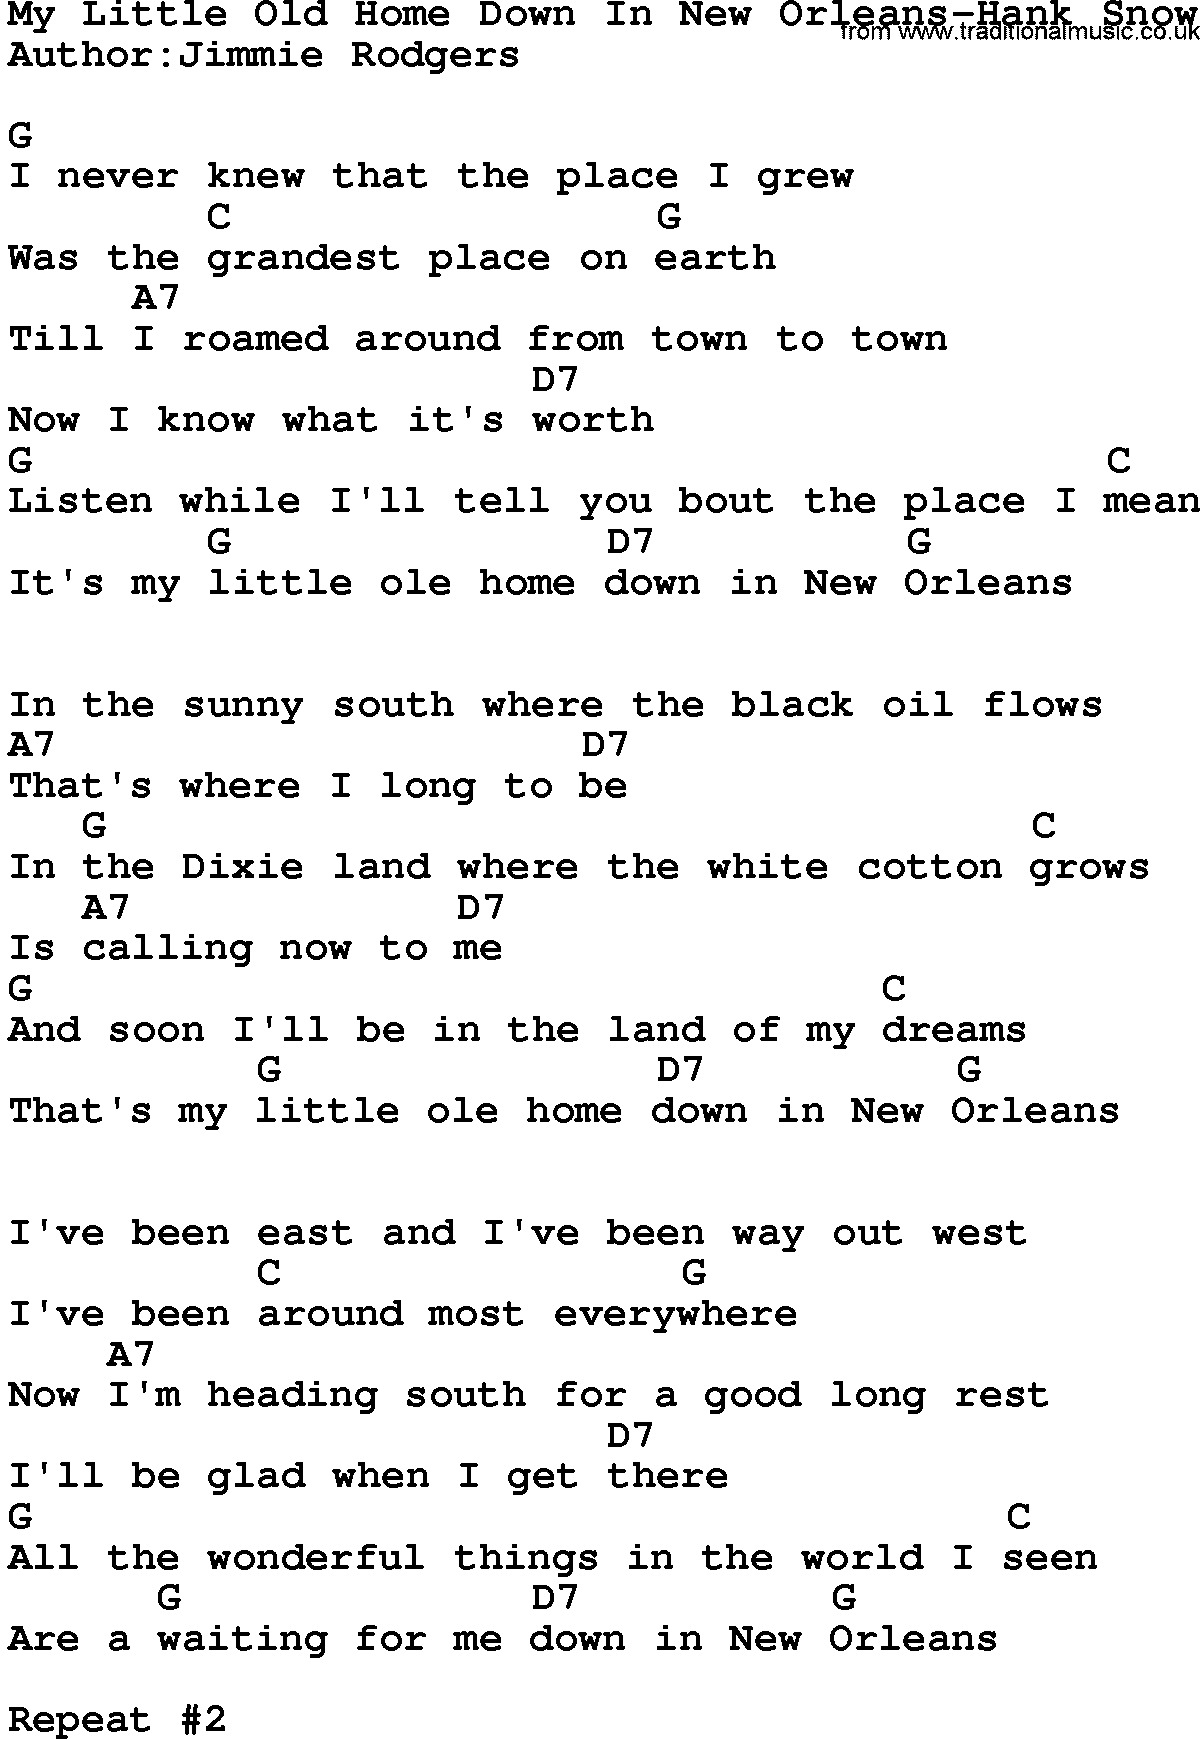 Country music song: My Little Old Home Down In New Orleans-Hank Snow lyrics and chords